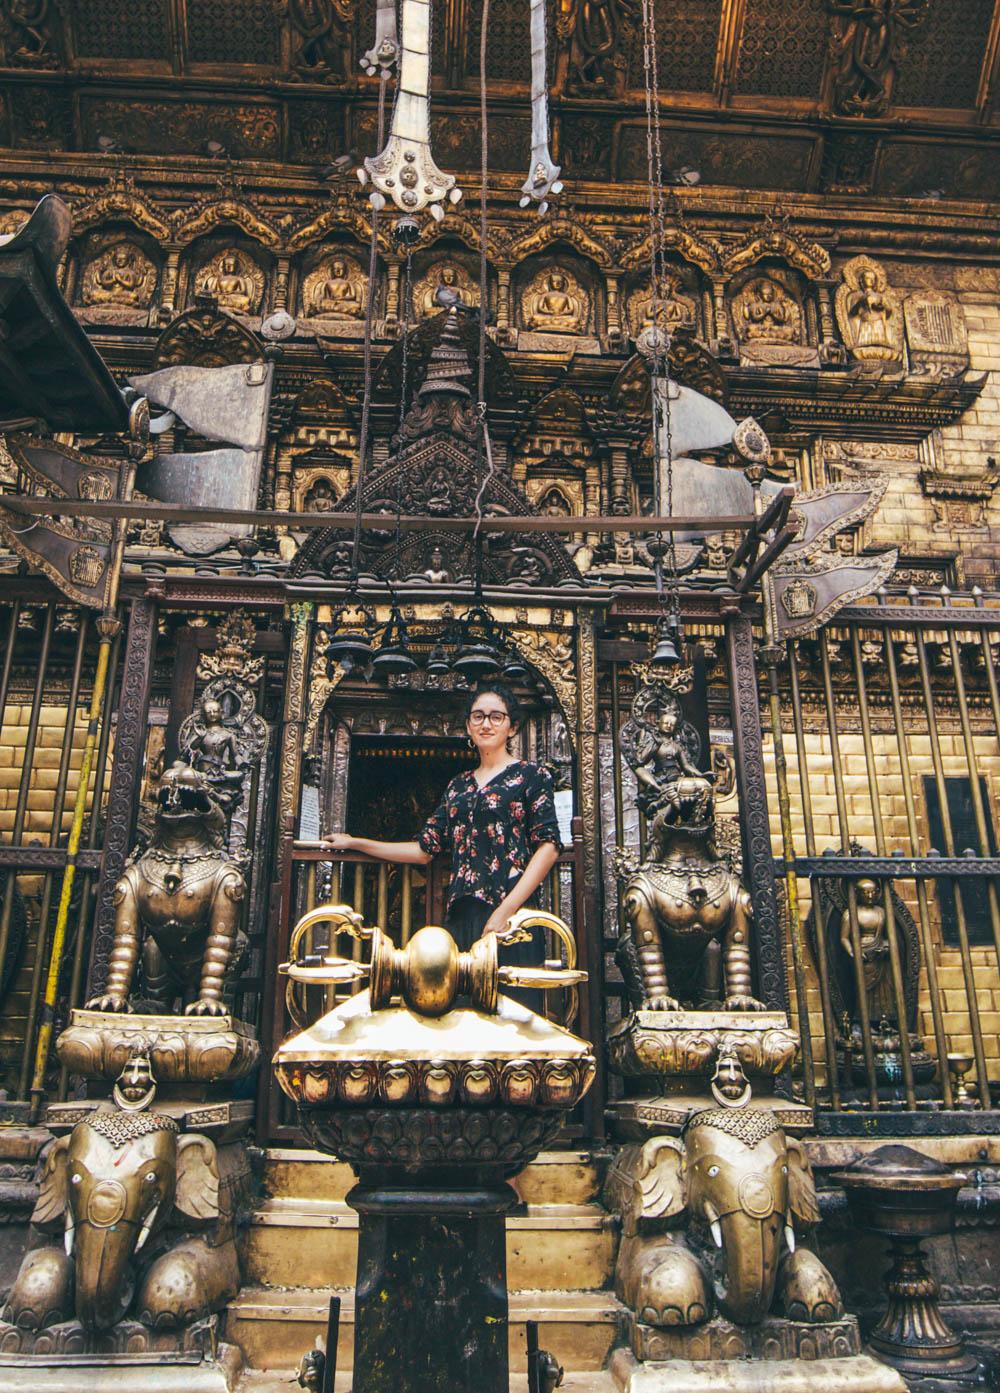 A woman at a temple in Patan Ancient City, one of the places to visit in Kathmandu.